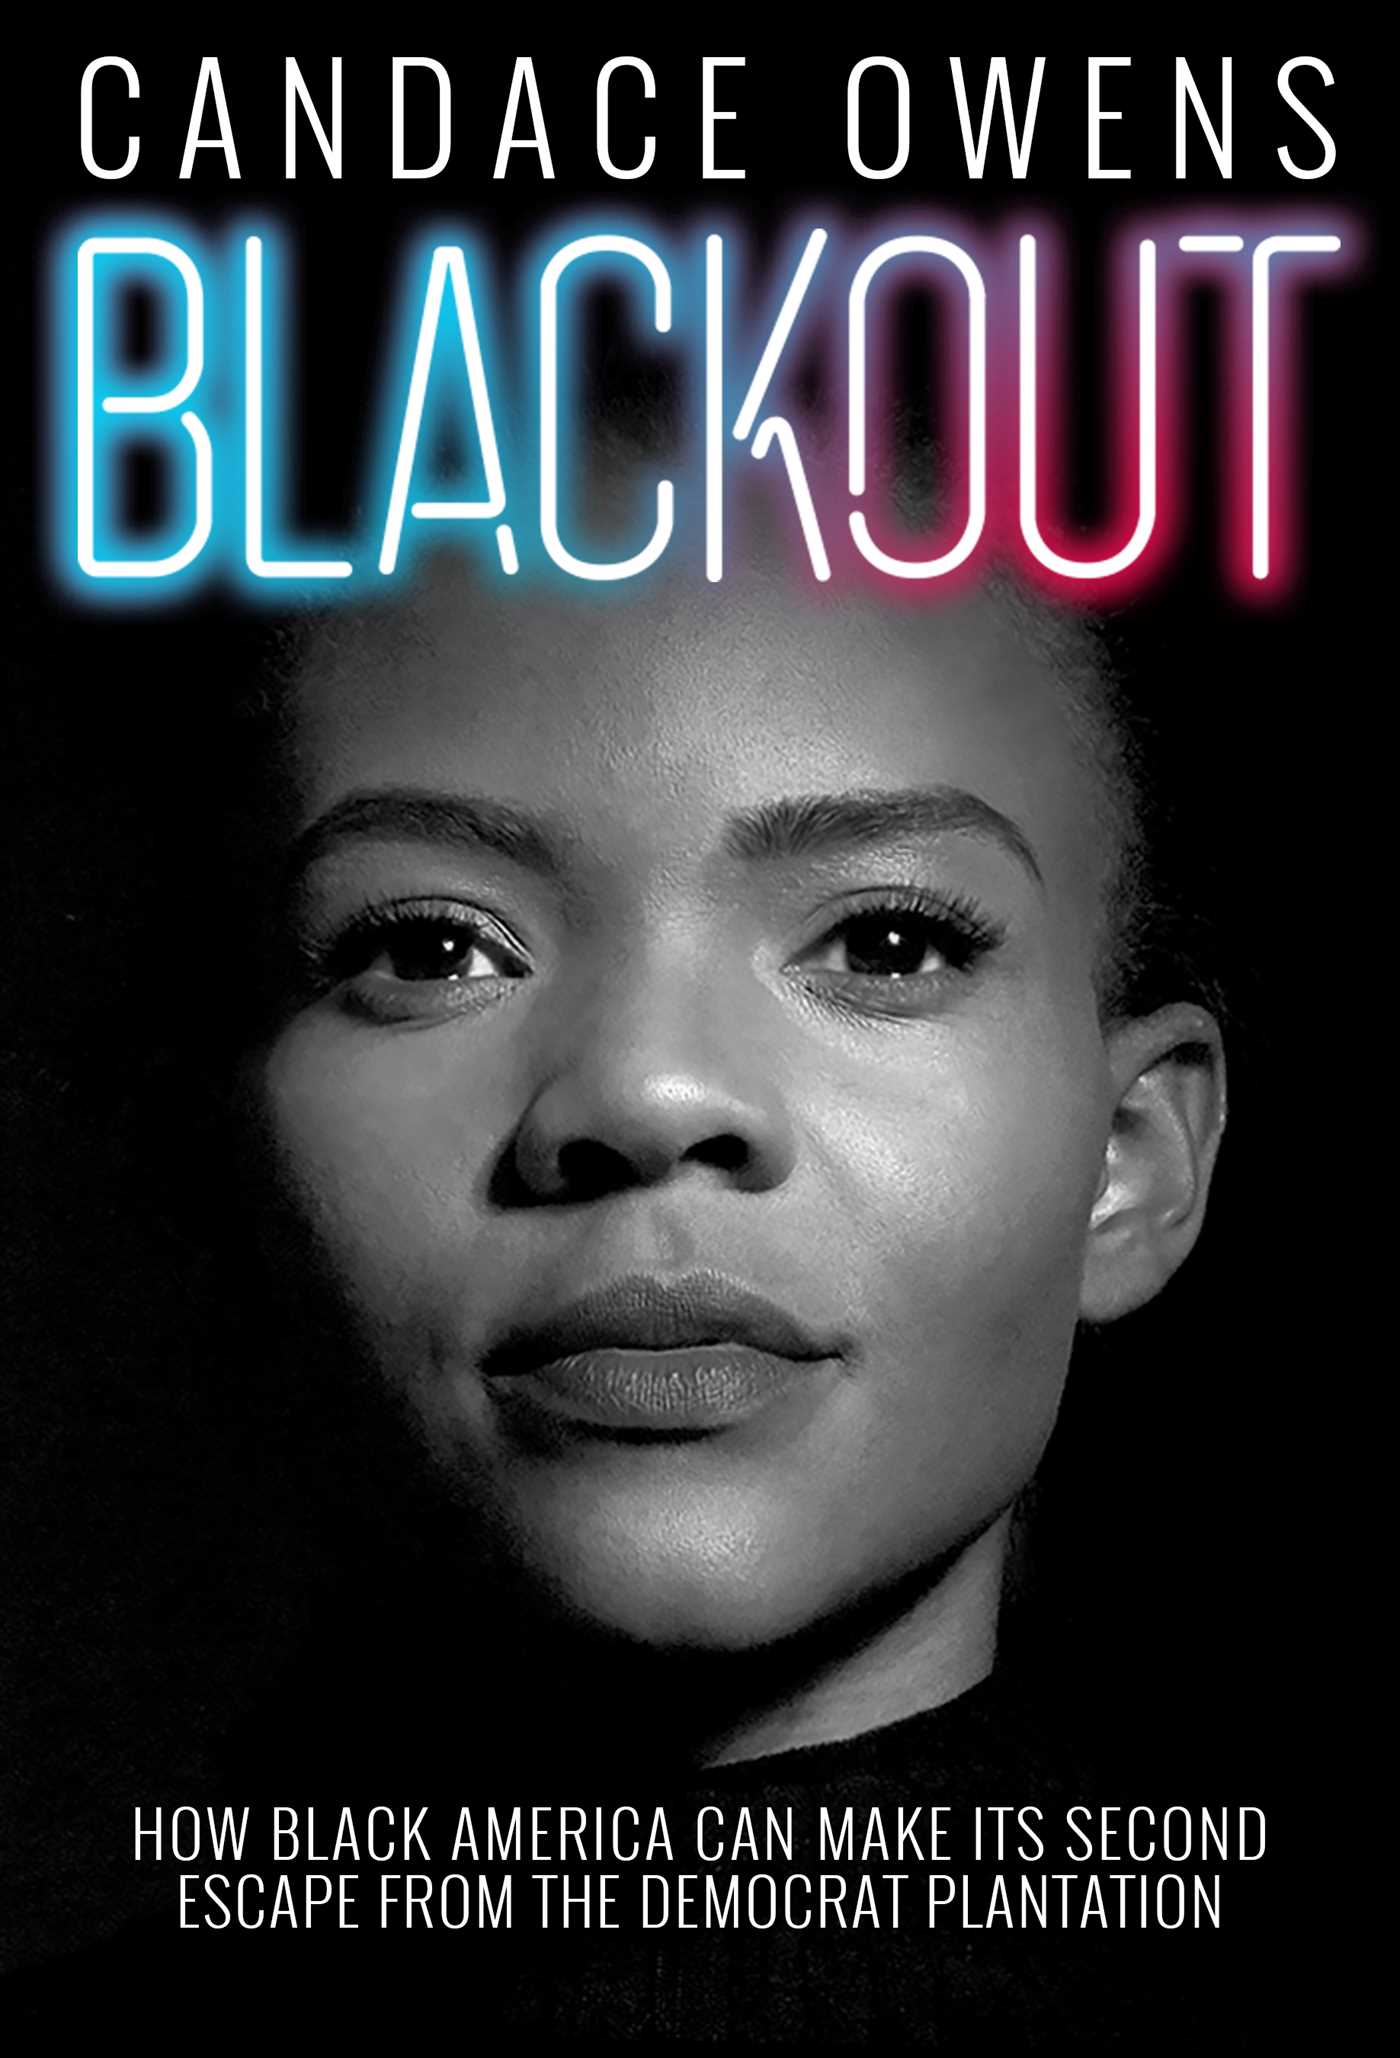 [EPUB] Blackout: How Black America Can Make Its Second Escape from the Democrat Plantation by Candace Owens